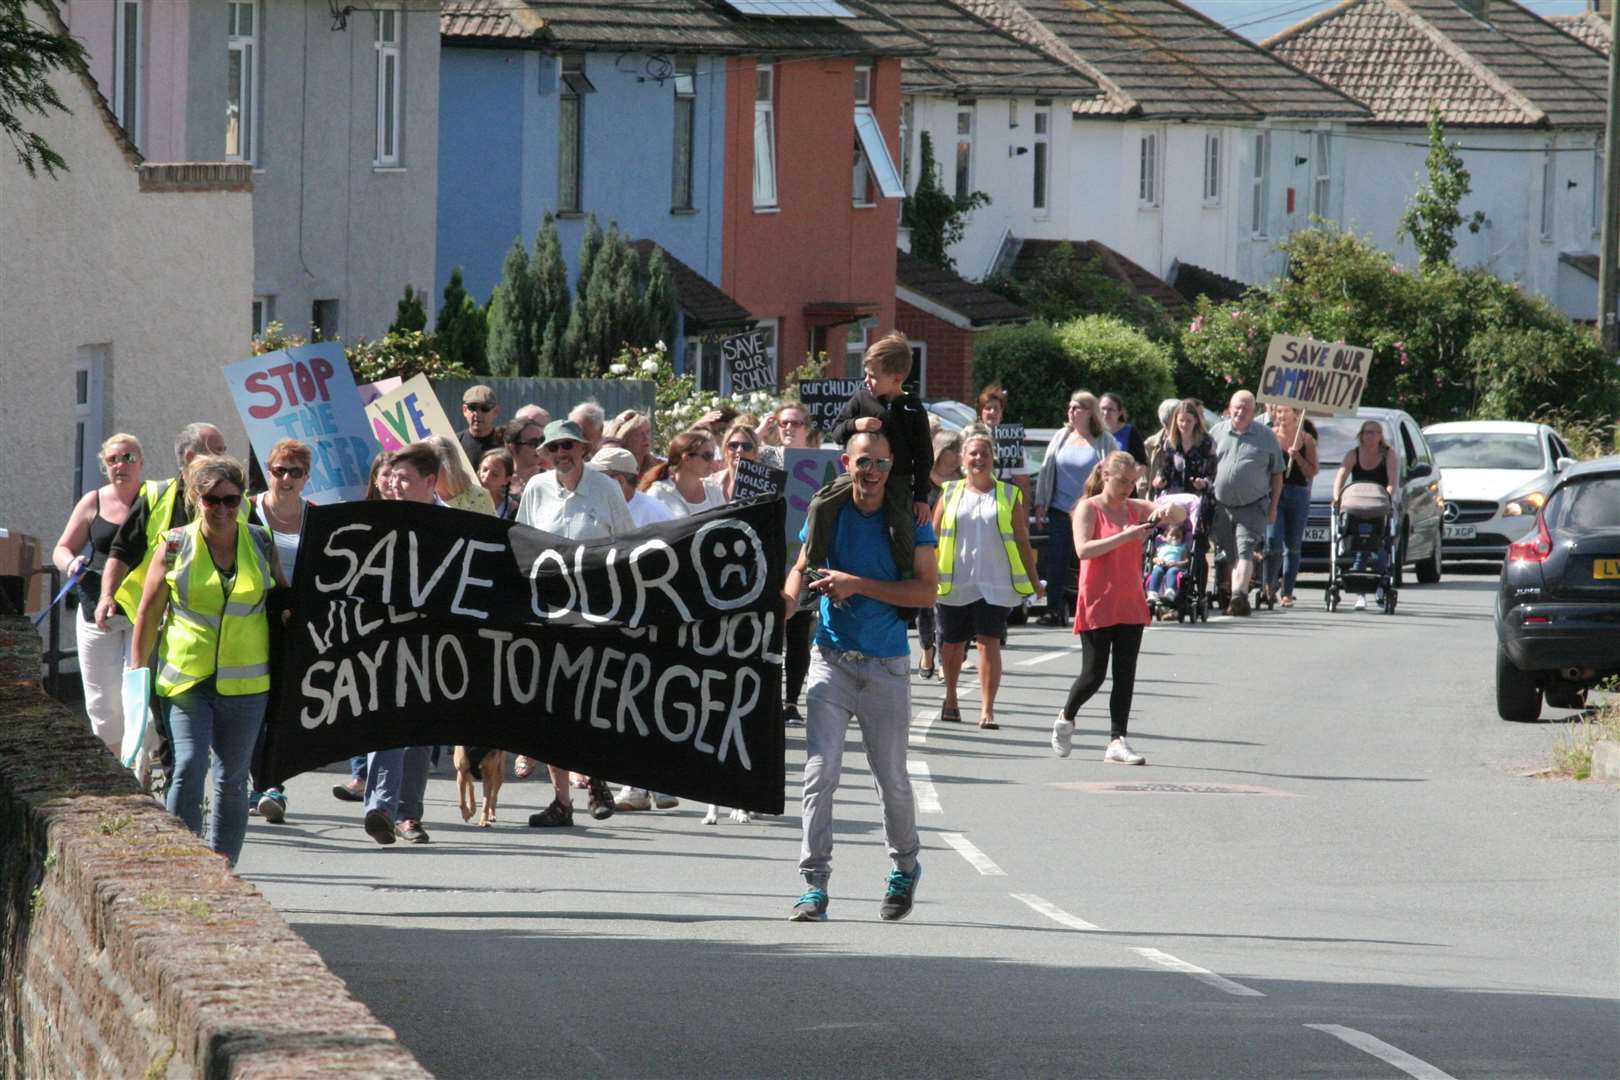 Protestors marching against merger plans in 2019